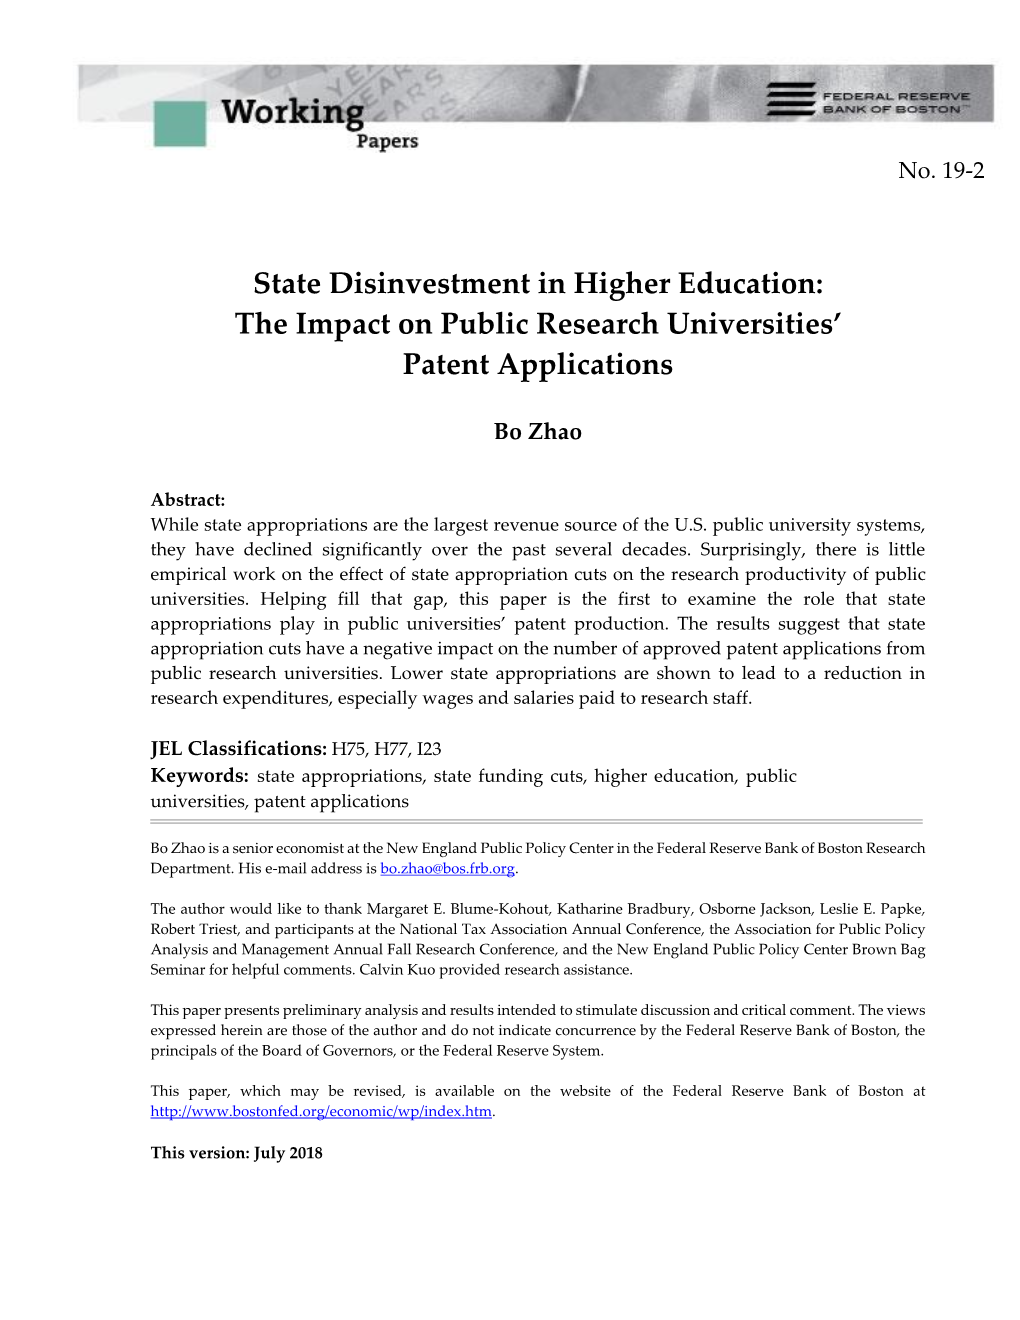 State Disinvestment in Higher Education: the Impact on Public Research Universities’ Patent Applications